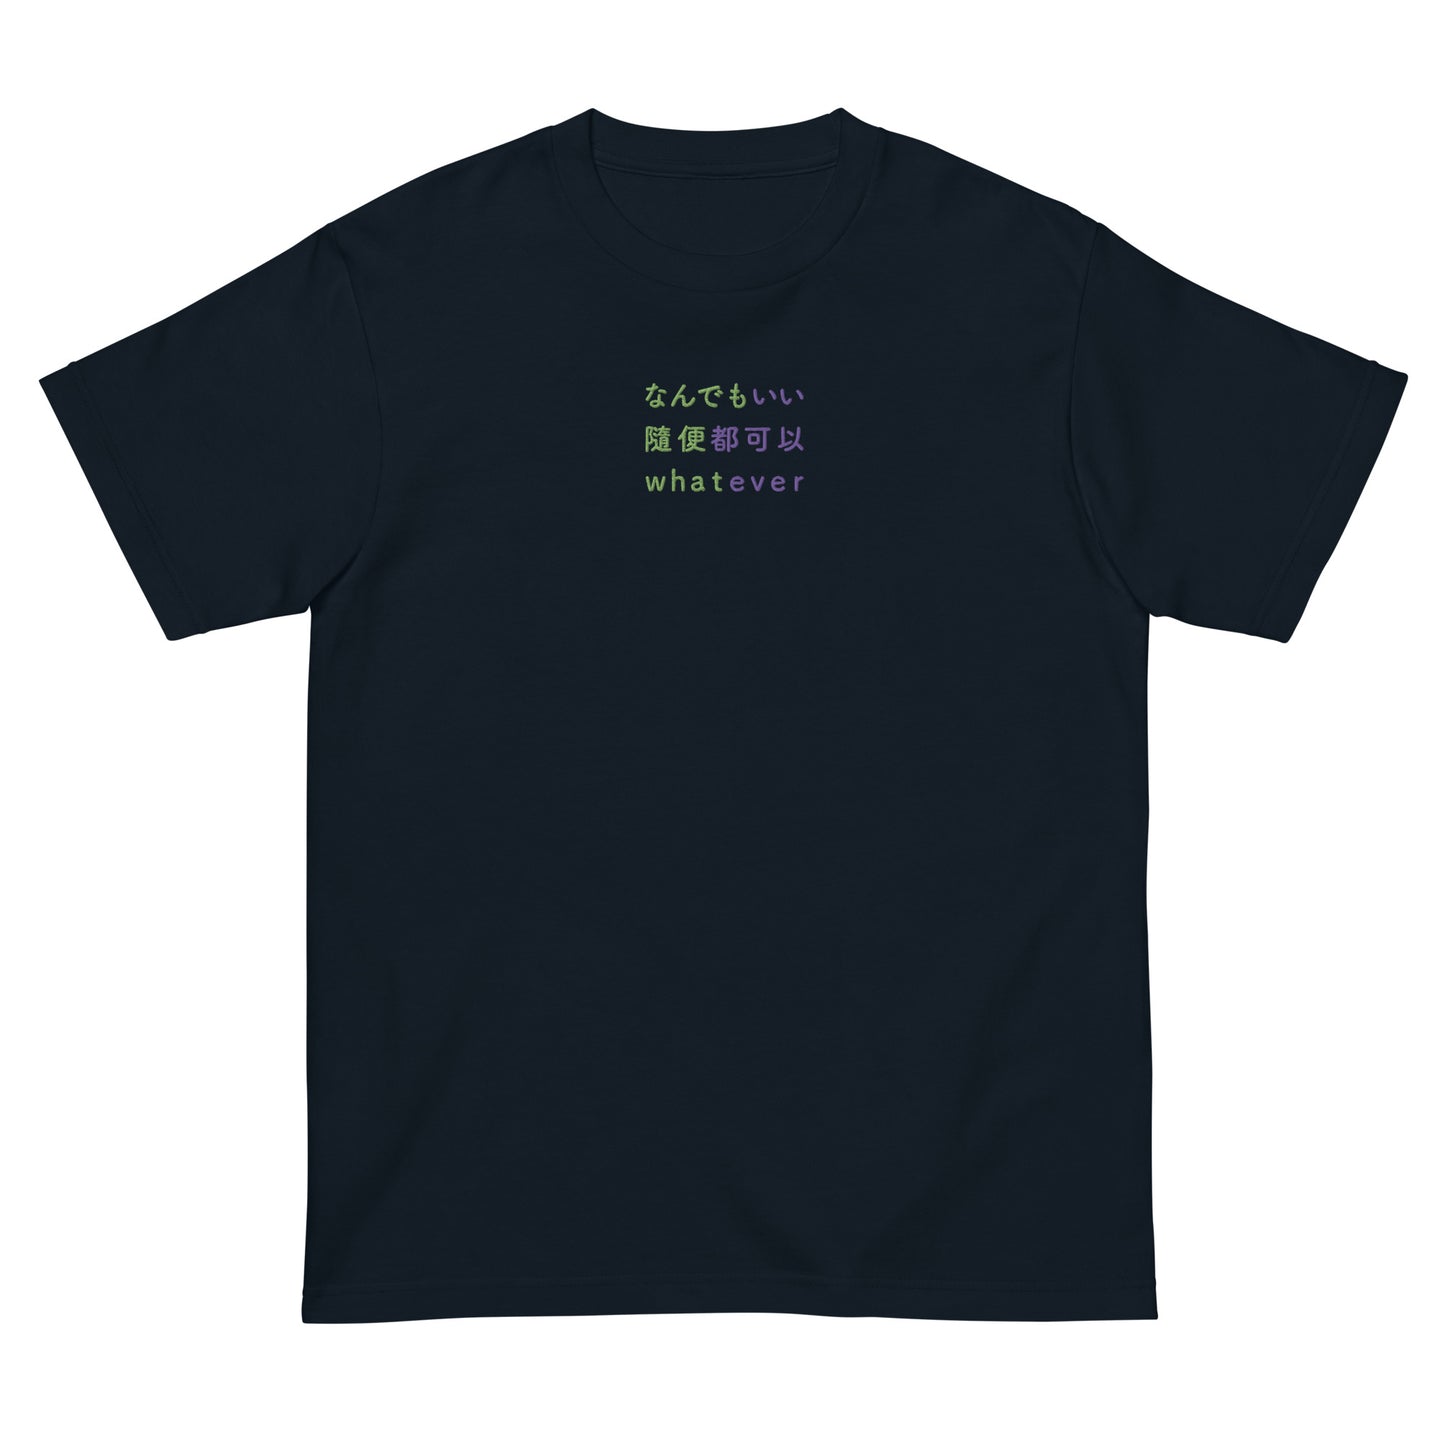 Navy High Quality Tee - Front Design with an Green,Purple Embroidery "Whatever" in Japanese,Chinese and English